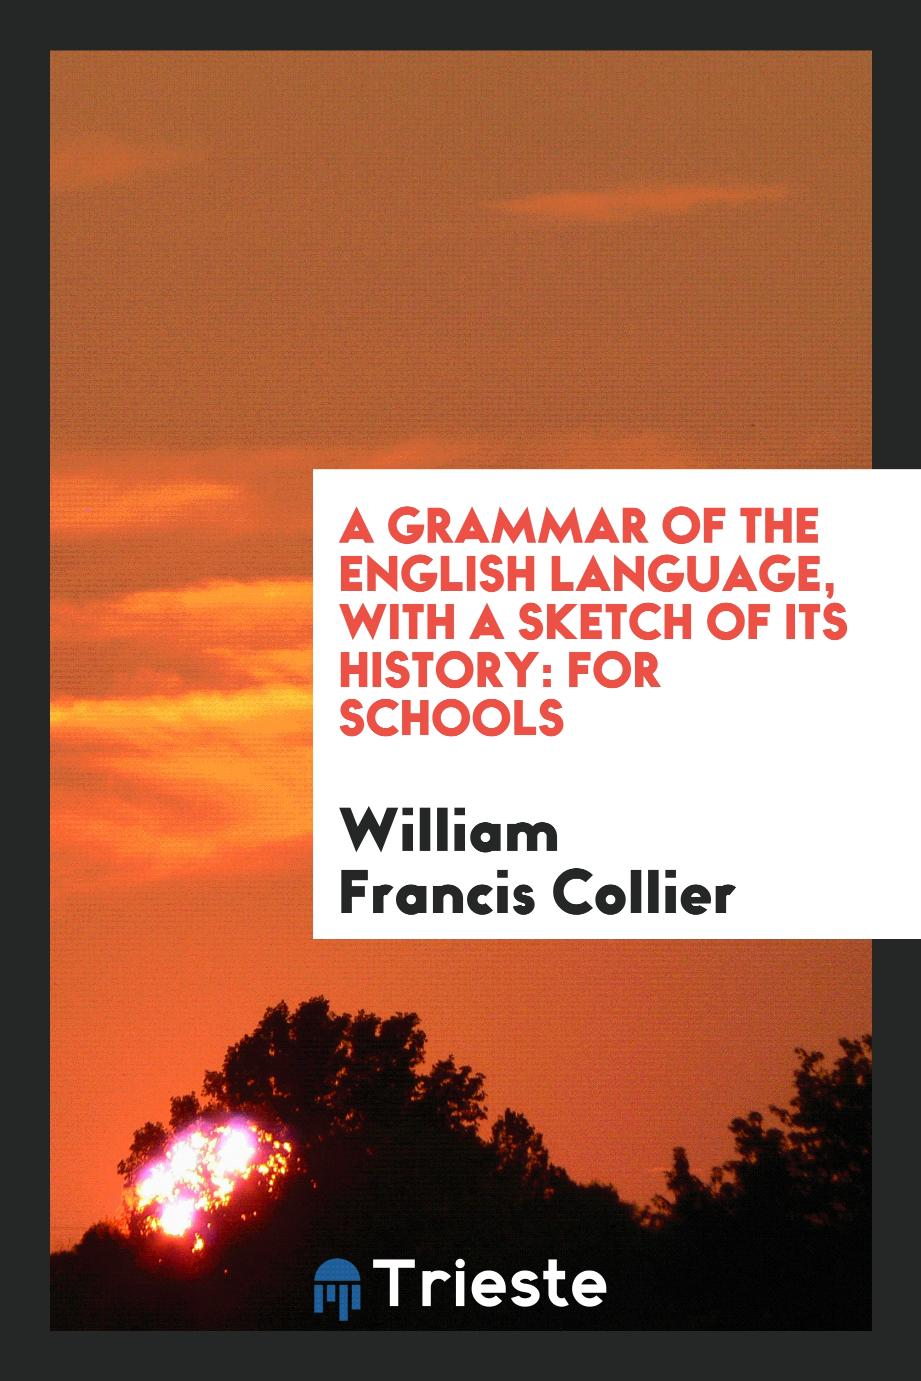 A Grammar of the English Language, with a Sketch of Its History: for Schools